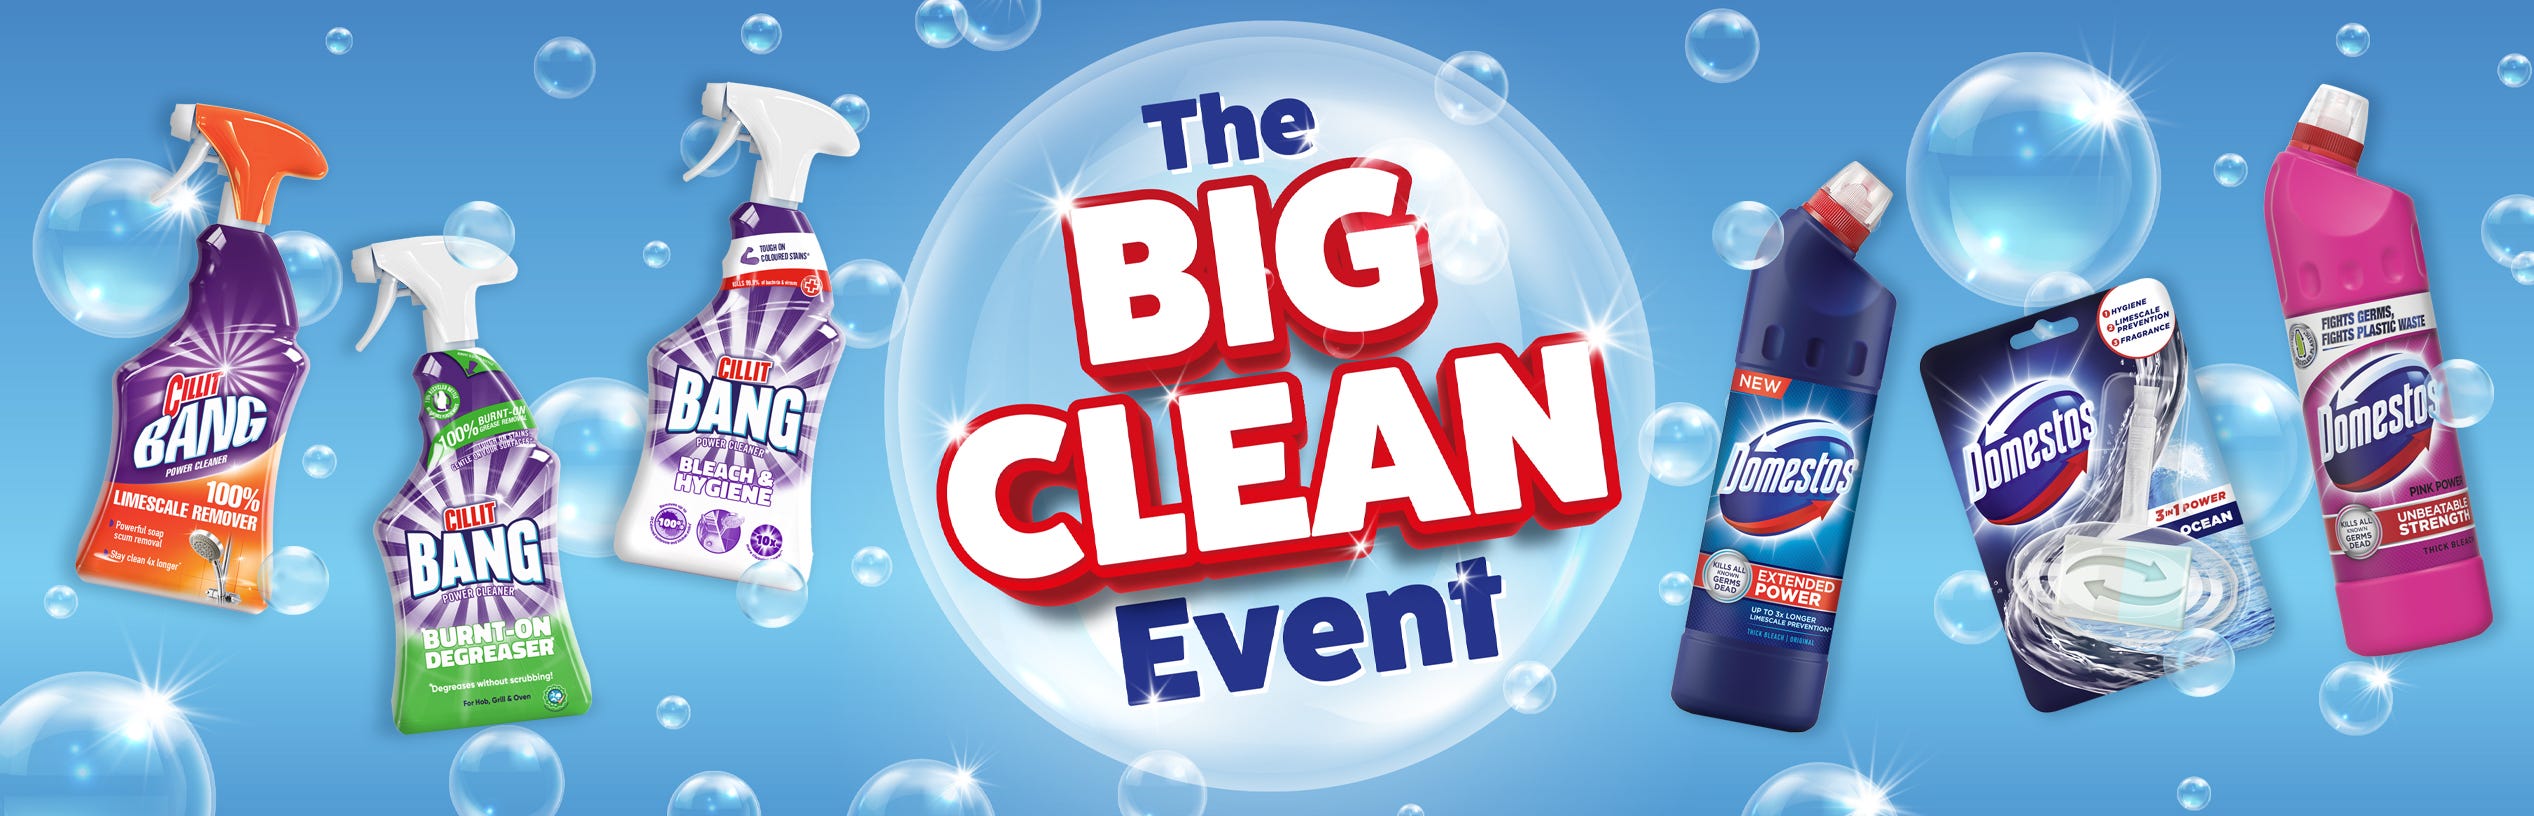 The Big Clean Event